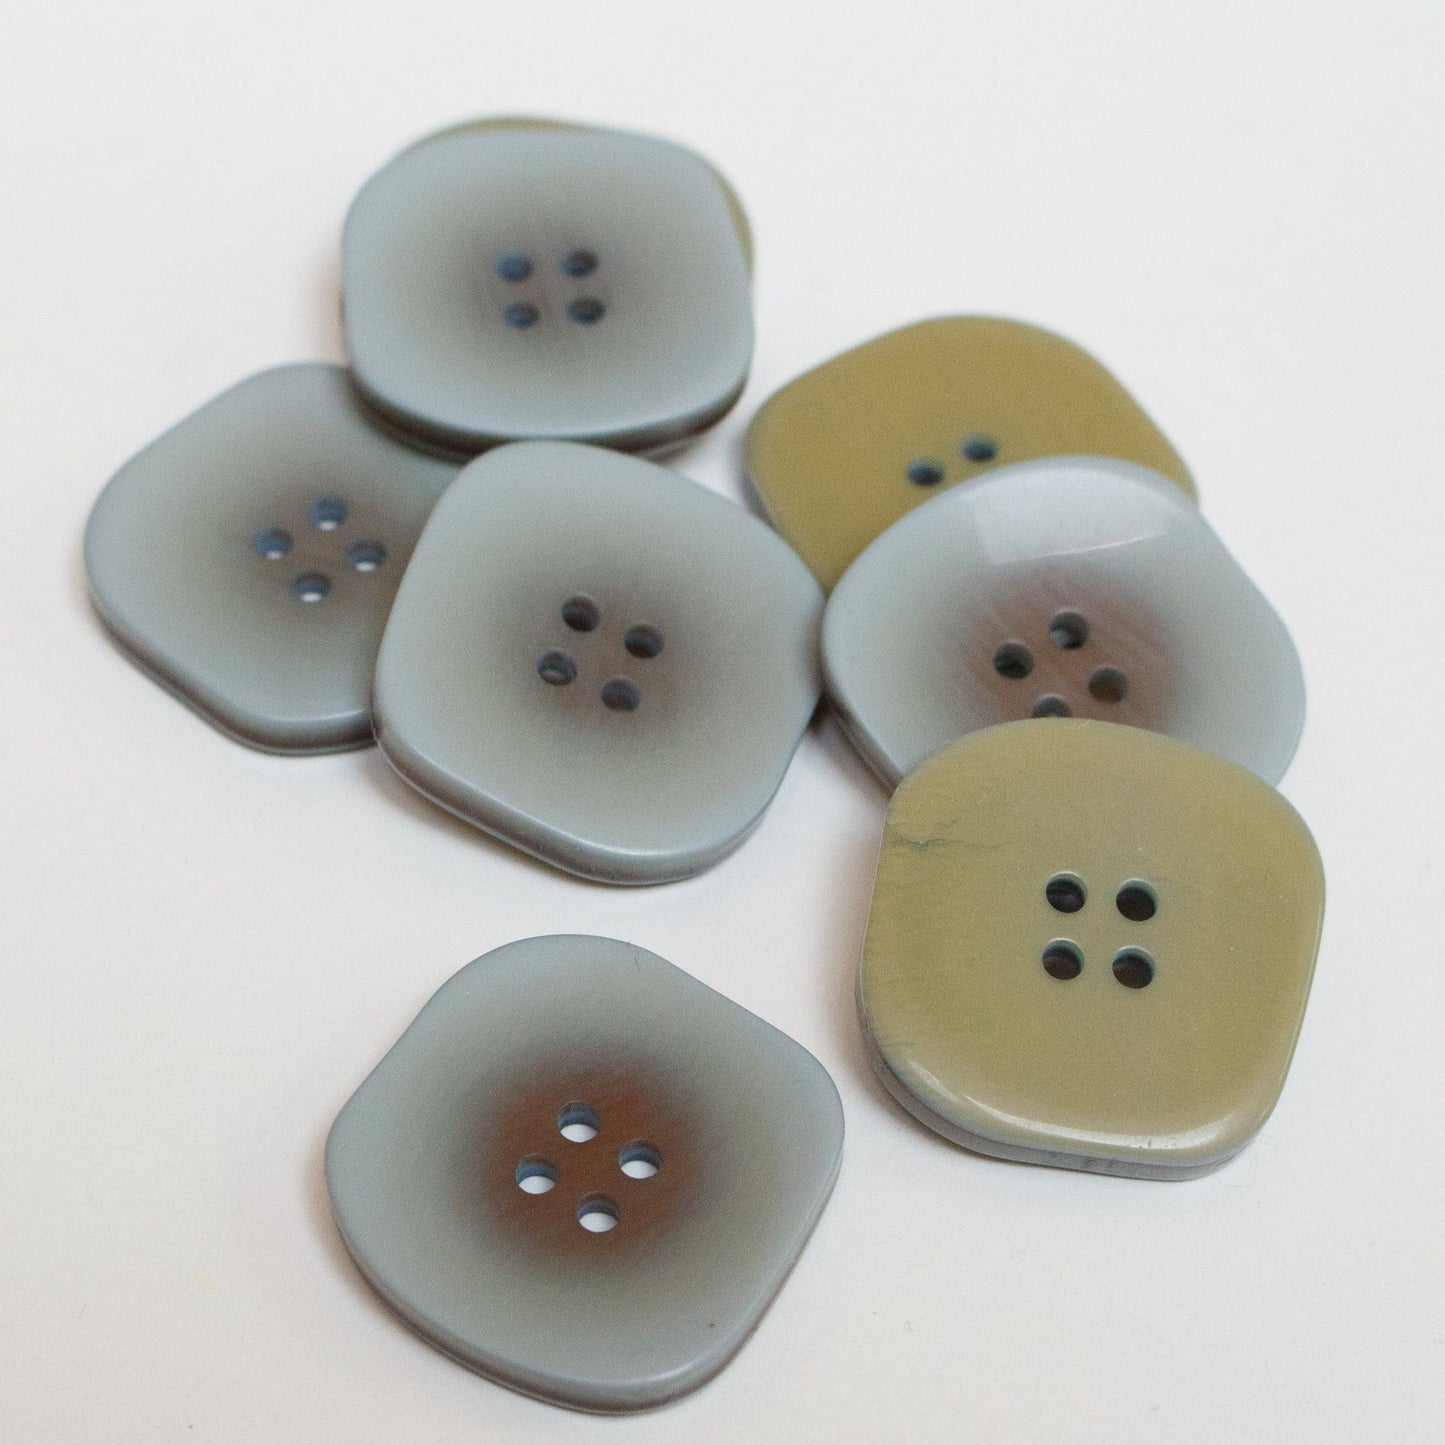 5 x Irregular Square Buttons in Sage Green - 28mm